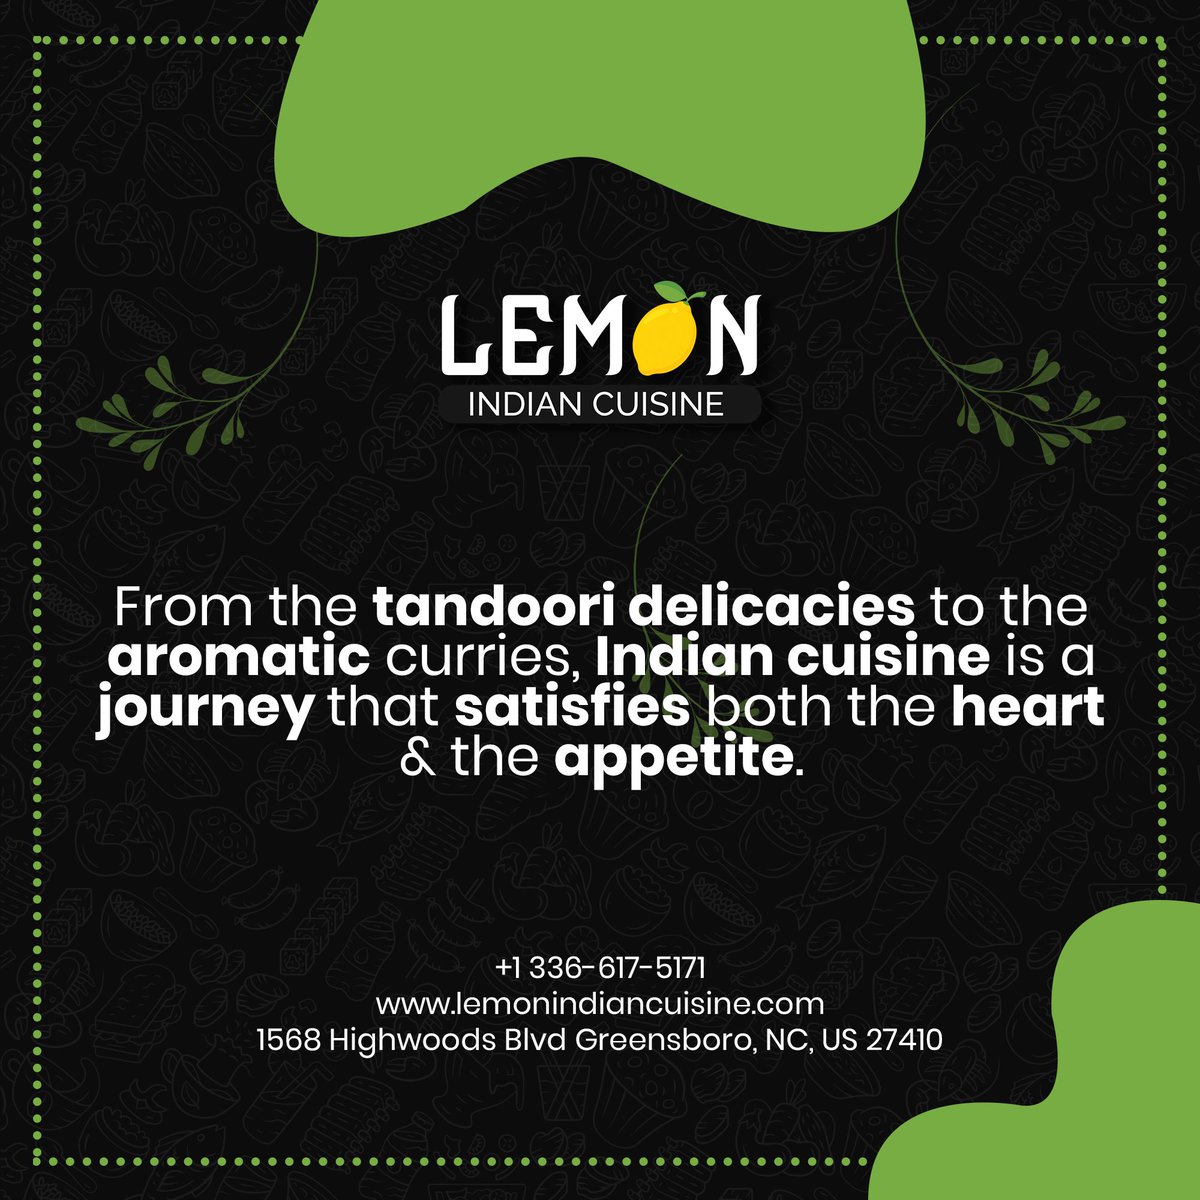 🍋Discover the perfect blend of tradition and innovation✨ 
.
.
#LemonIndianCuisine #indianfood #indianfoodie #indianfoodlovers #winstonsalemfood #triadfood #hpufood #uncgfood #quotes #quote #quoteoftheday